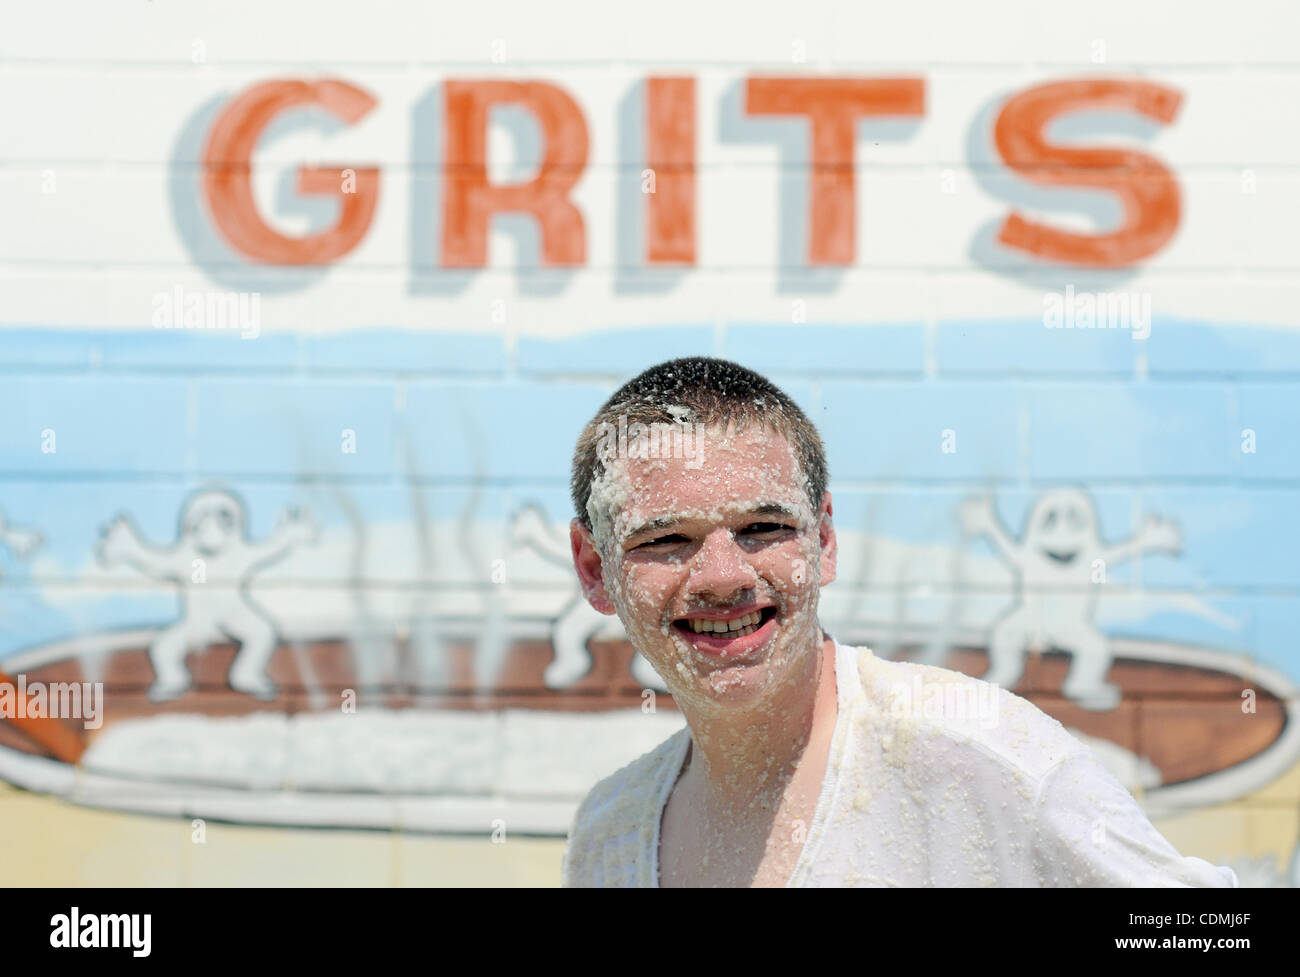 Apr. 9, 2011 - Warwick, GEORGIA, U.S. - Michael McDaniel, 15, of Warwick, Georgia, reacts after competing in the Grits Roll during the 14th annual National Grits Festival in Warwick, Georgia USA on 09 April 2011. McDaniel placed second in his division, gaining 84.5 pounds of grits. Grits, a food mad Stock Photo